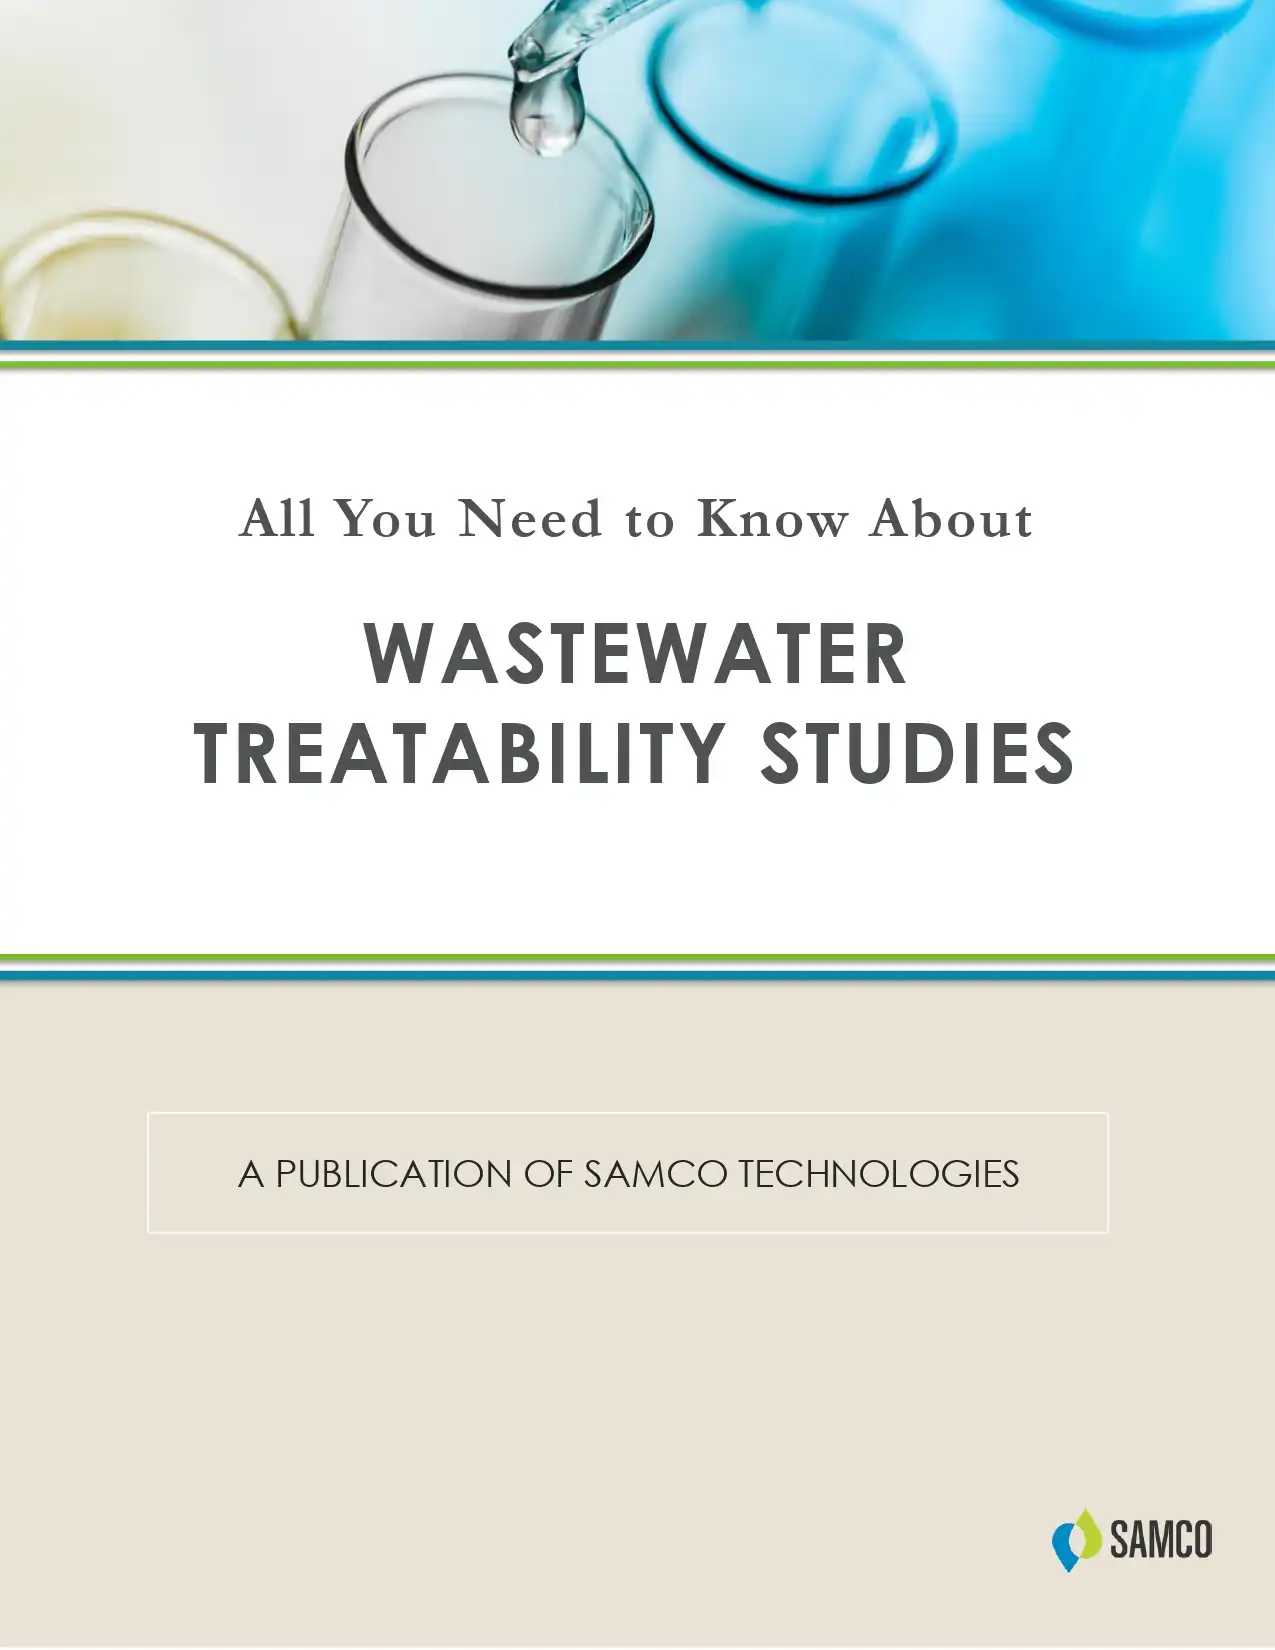 All You Need to Know About Wastewater Treatability Studies